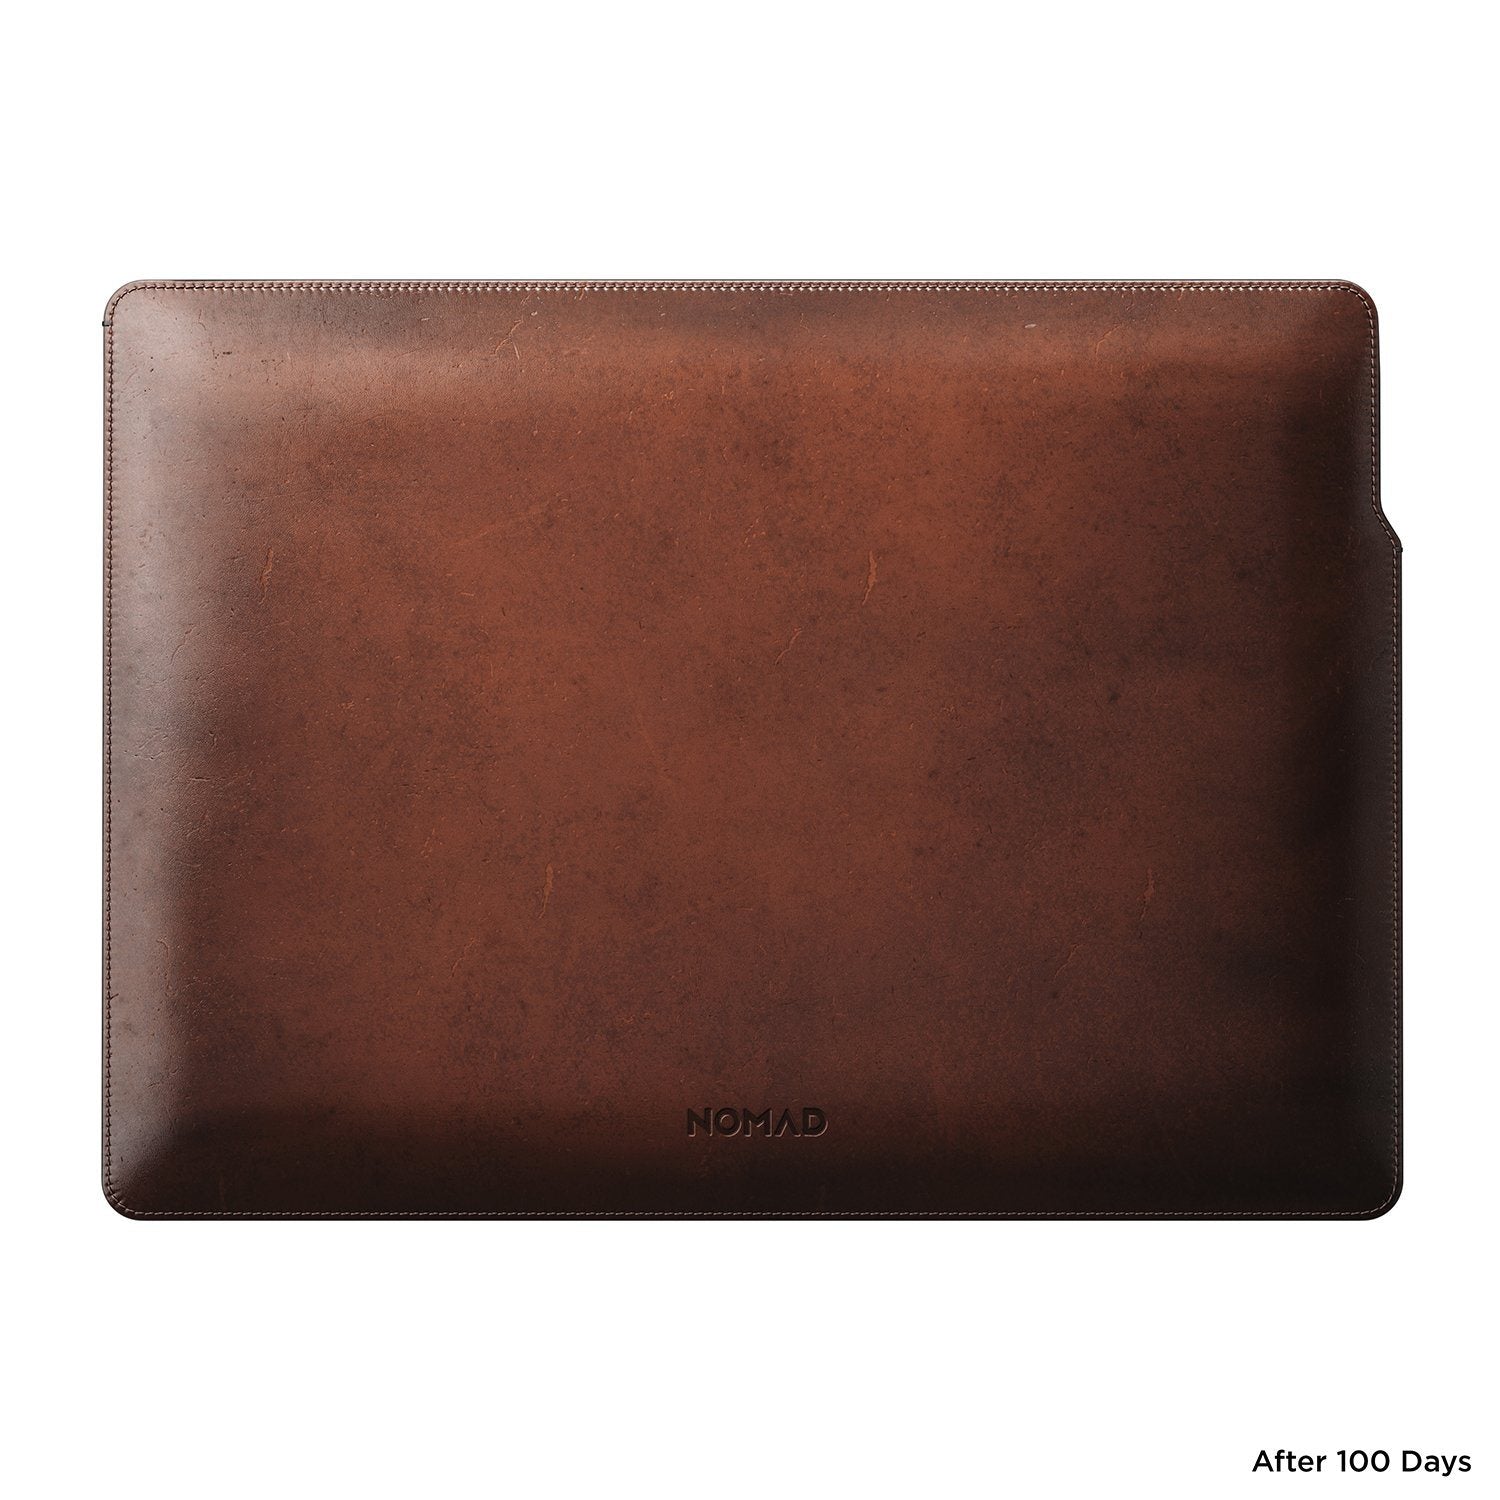 NOMAD ECCO Leather Sleeve for MacBook Pro 16", English Tan Default NOMAD 